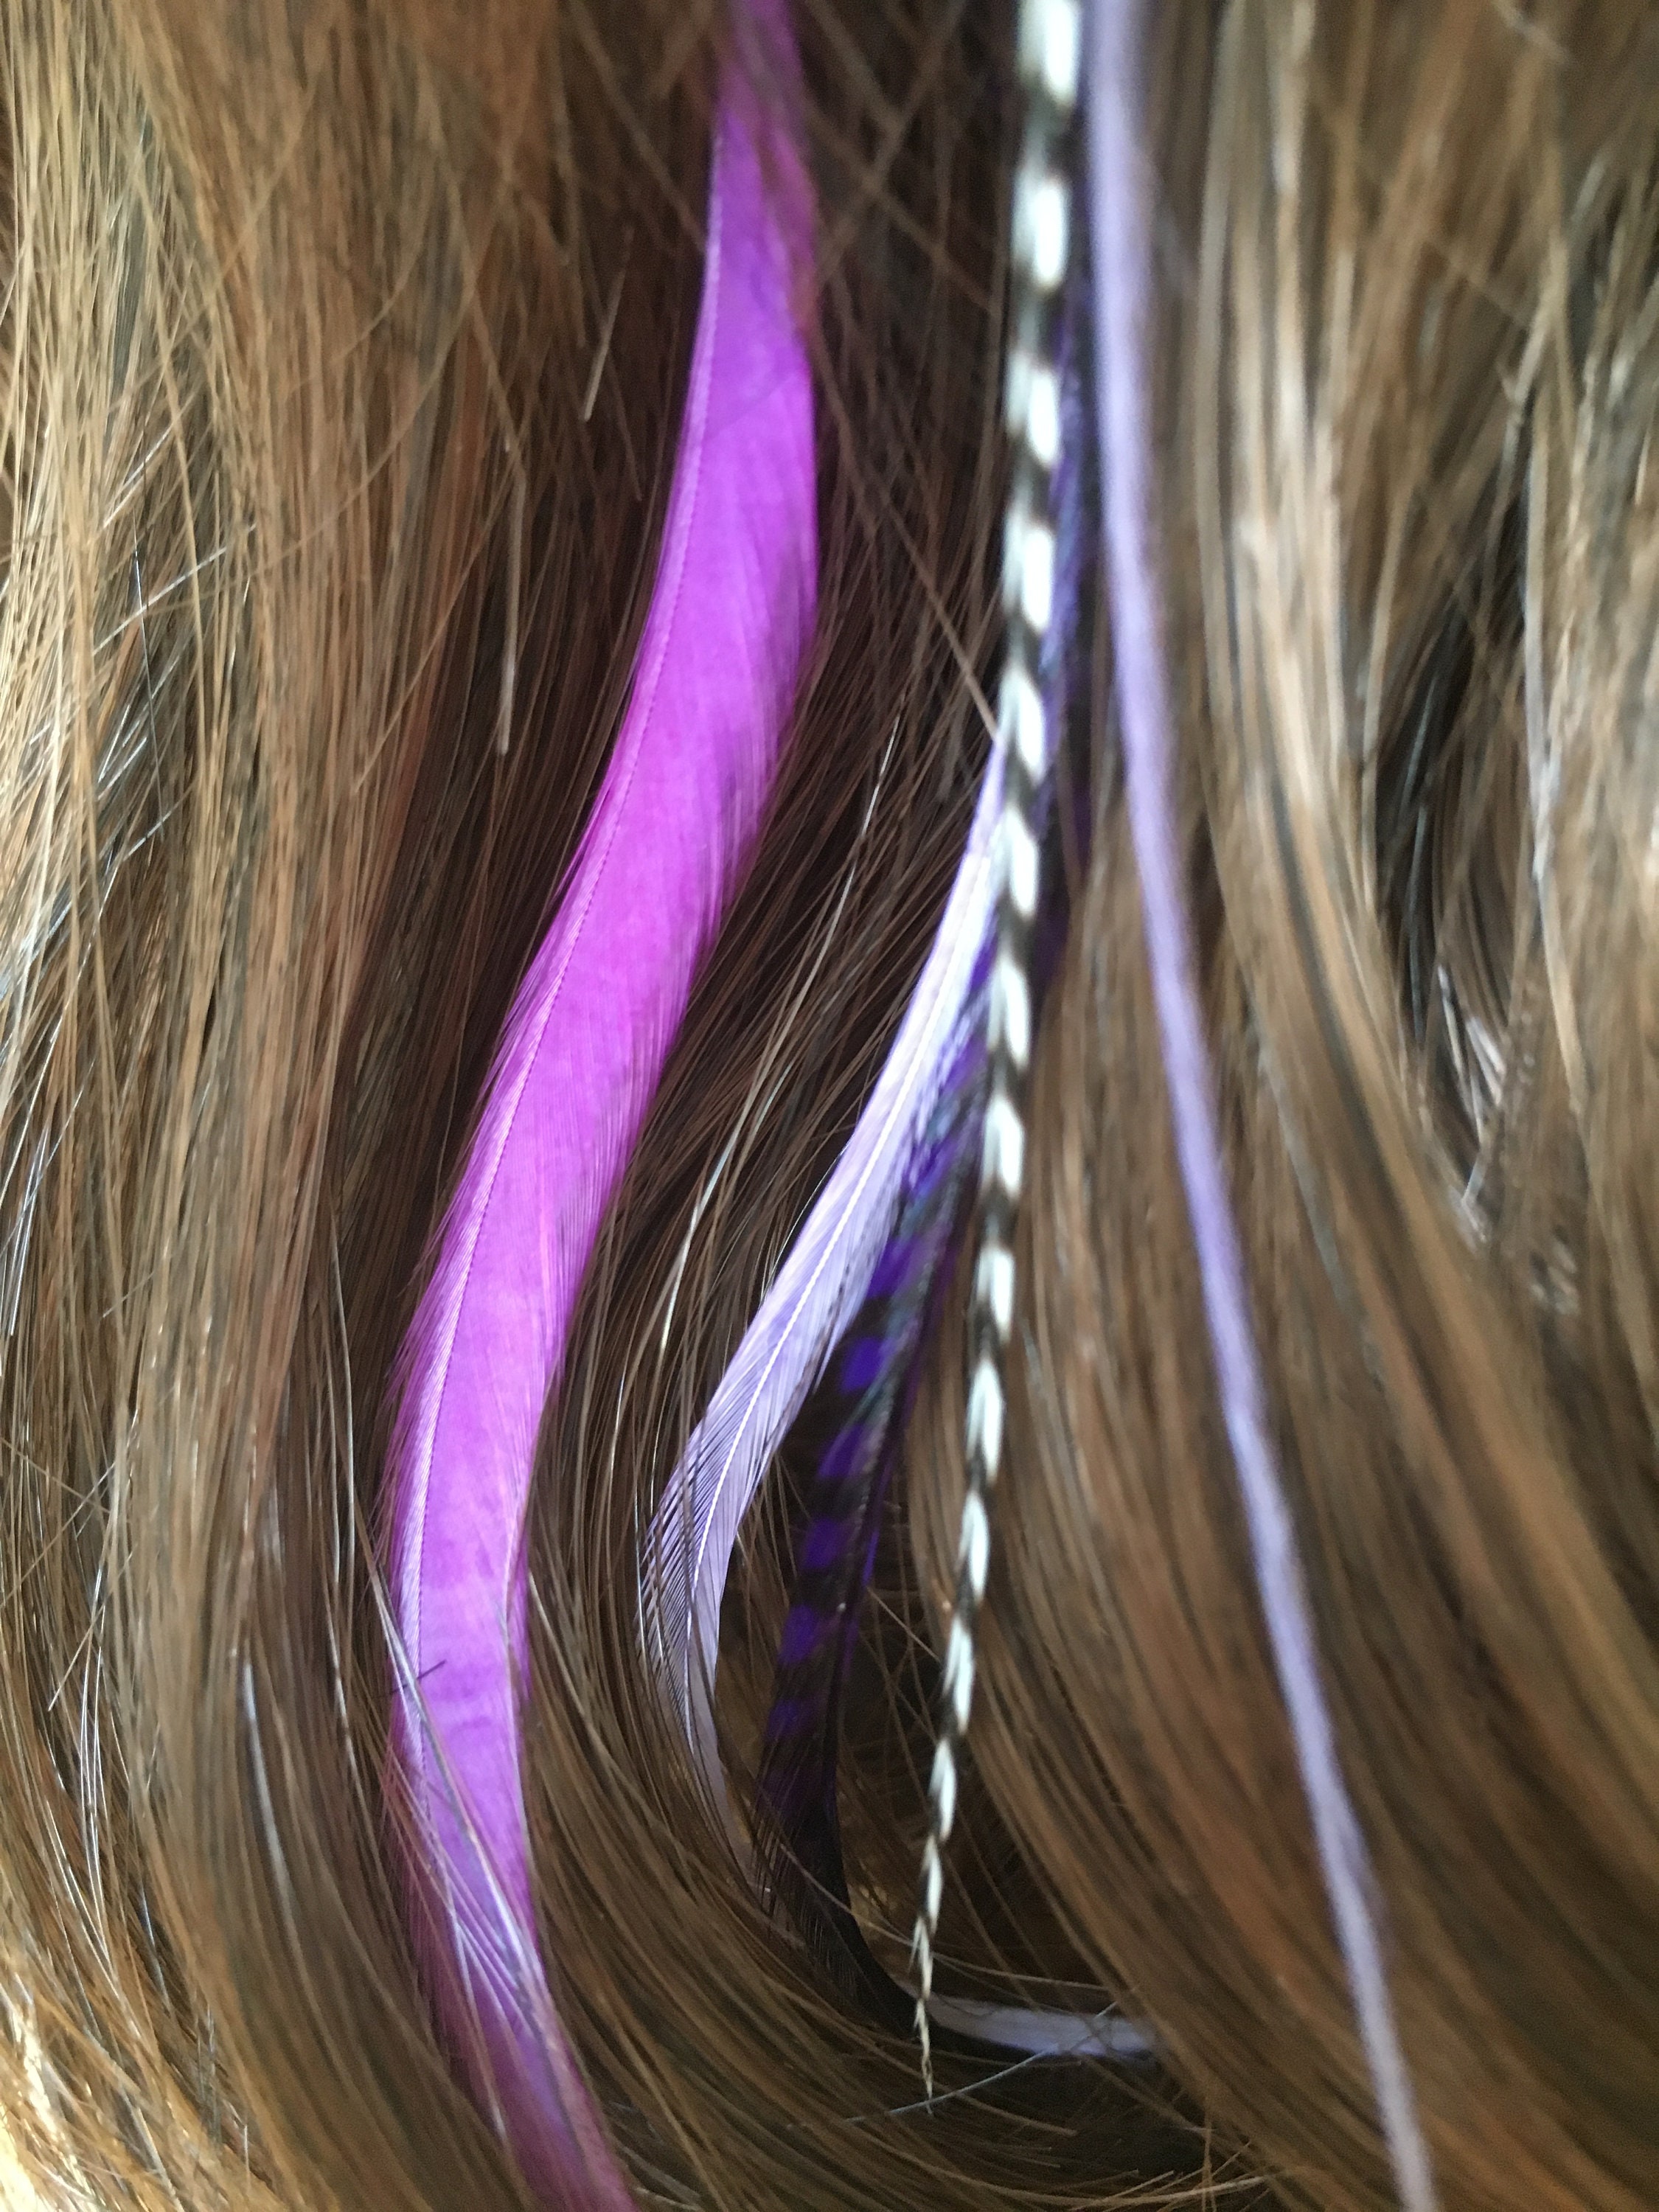 Long Purple/lavender Feather Hair Extensions 1 Bundle With 7